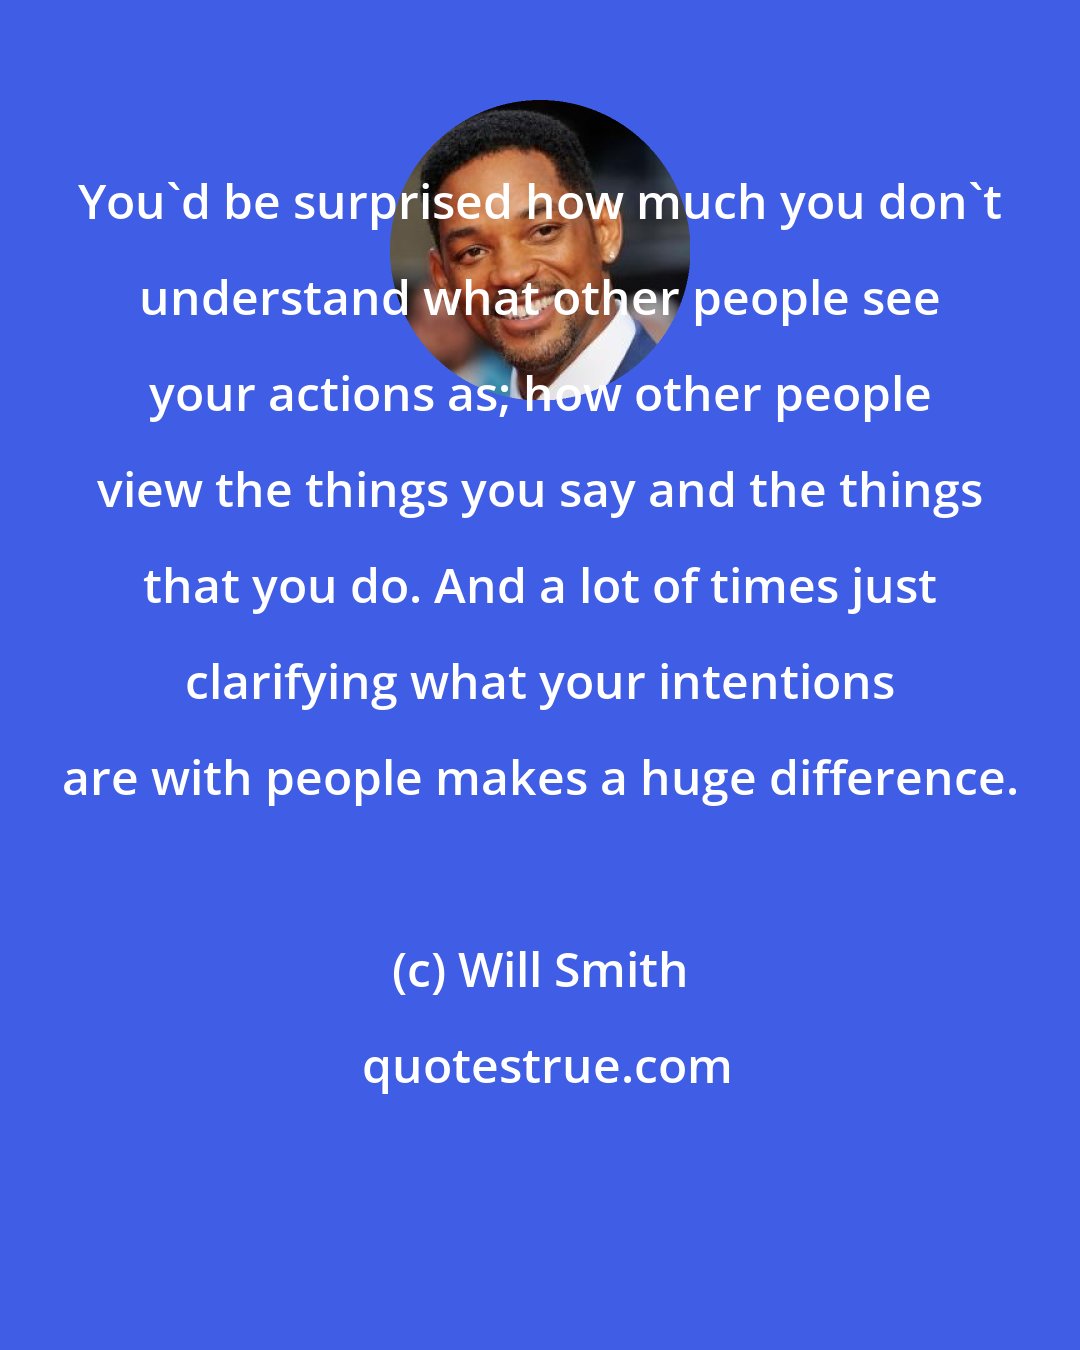 Will Smith: You'd be surprised how much you don't understand what other people see your actions as; how other people view the things you say and the things that you do. And a lot of times just clarifying what your intentions are with people makes a huge difference.